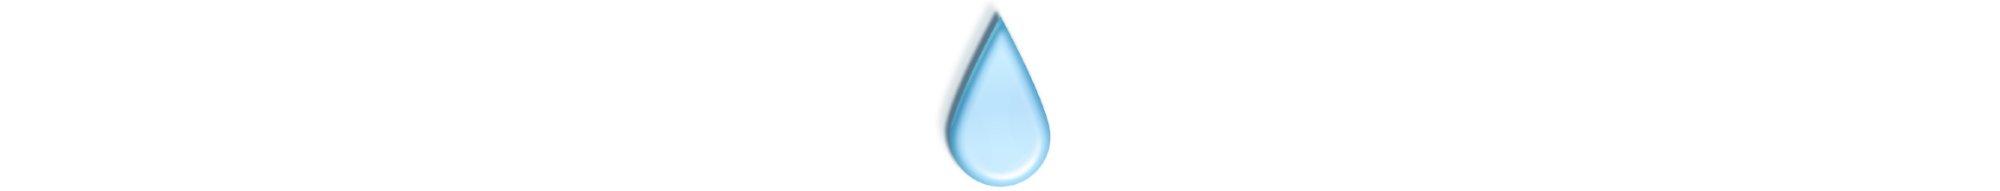 One realistic illustrated water drop